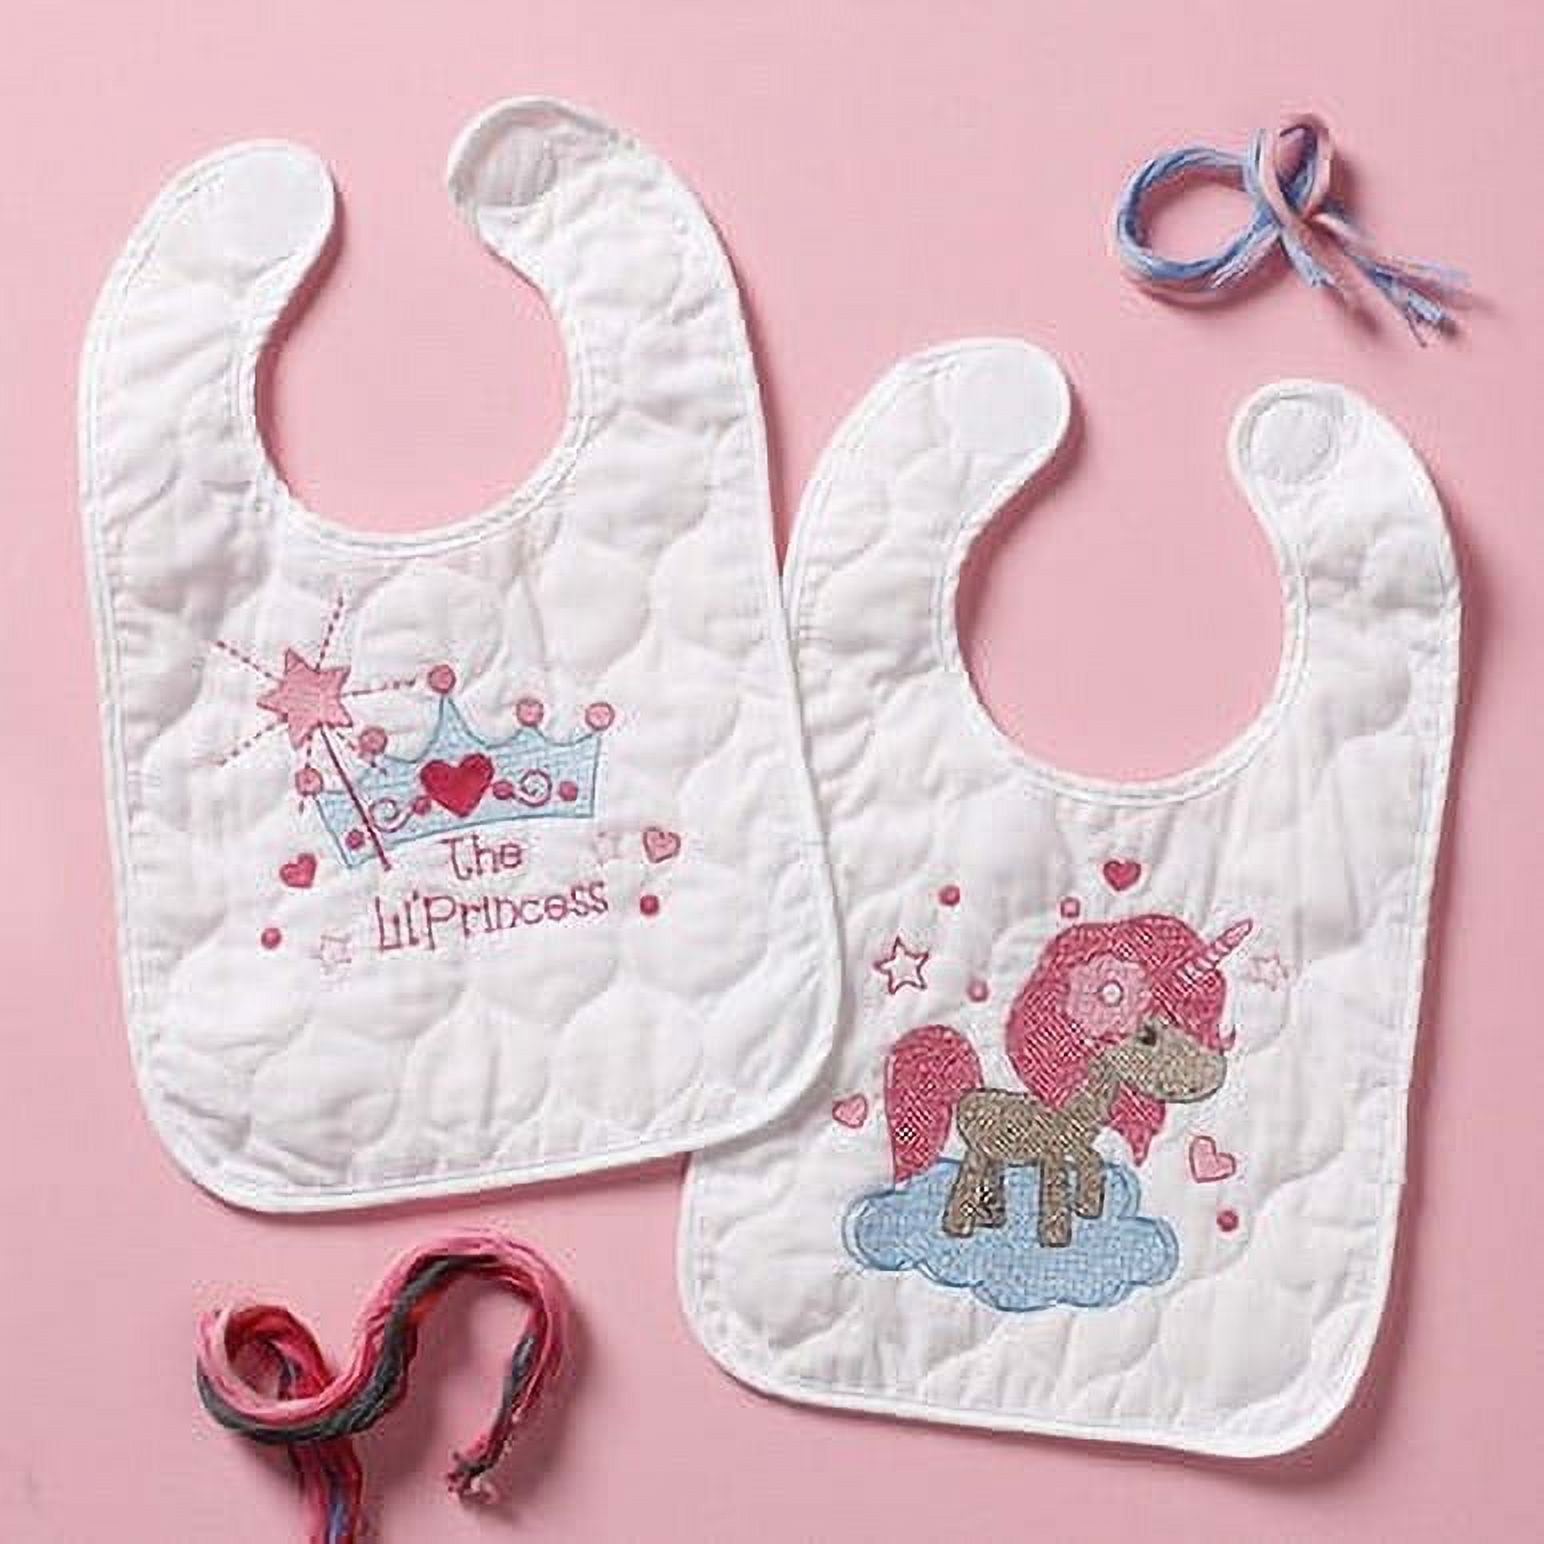 Bucilla gardening Bunnies Stamped Cross Stitch Crib Cover Kit 40755 34 X 43  Pre-quilted Just Embroider and Give to the New Baby 